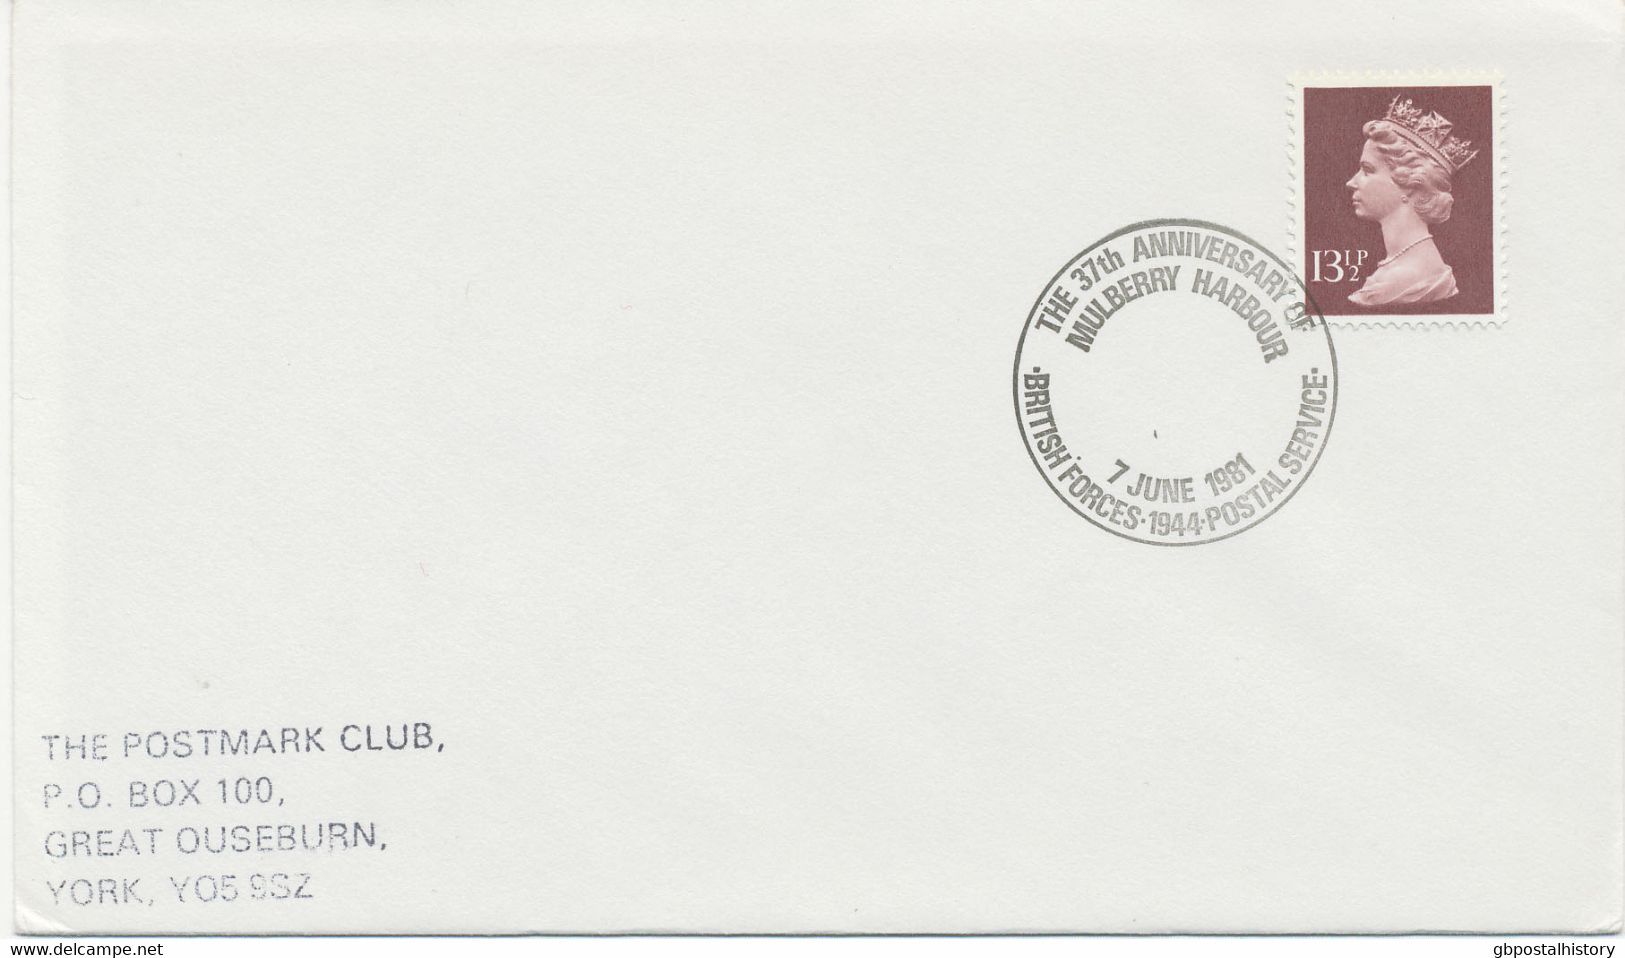 GB SPECIAL EVENT POSTMARKS THE 37th ANNIVERSARY OF MULBERRY HARBOUR - 7 JUNE 1981 - BRITISH FORCES 1944 POSTAL SERVICE - Marcophilie